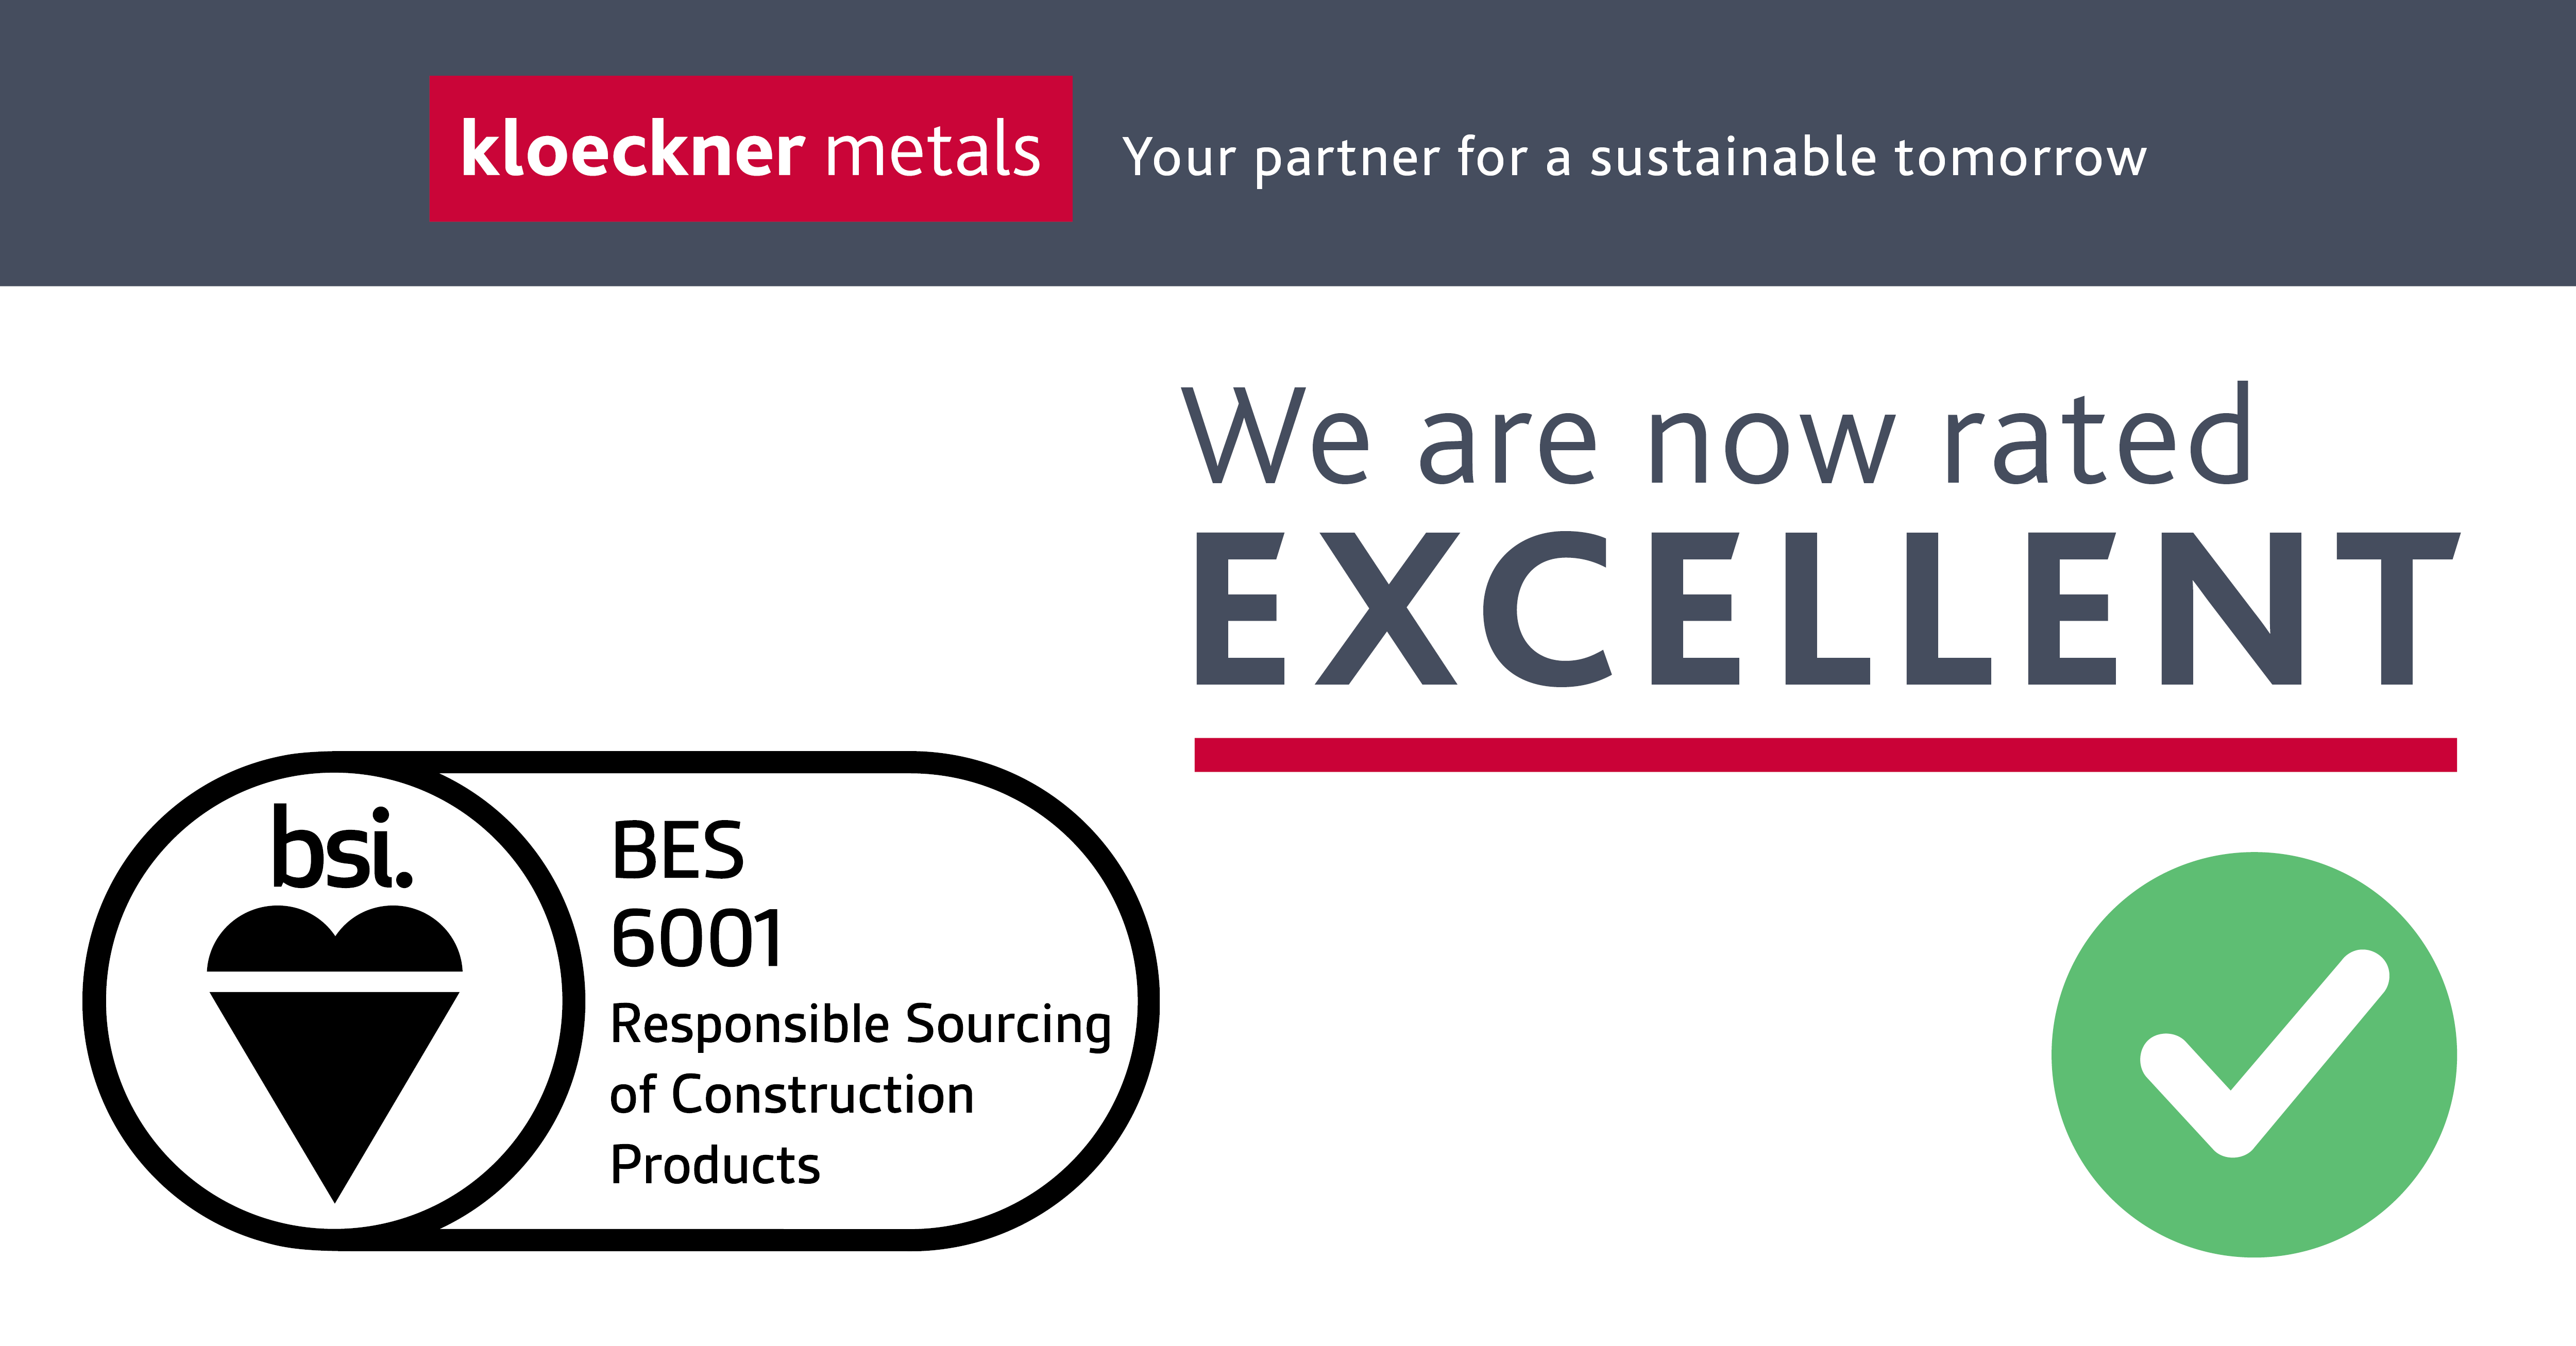 Kloeckner Metals achieves an “‘Excellent” rating for BES 6001 Responsible Sourcing